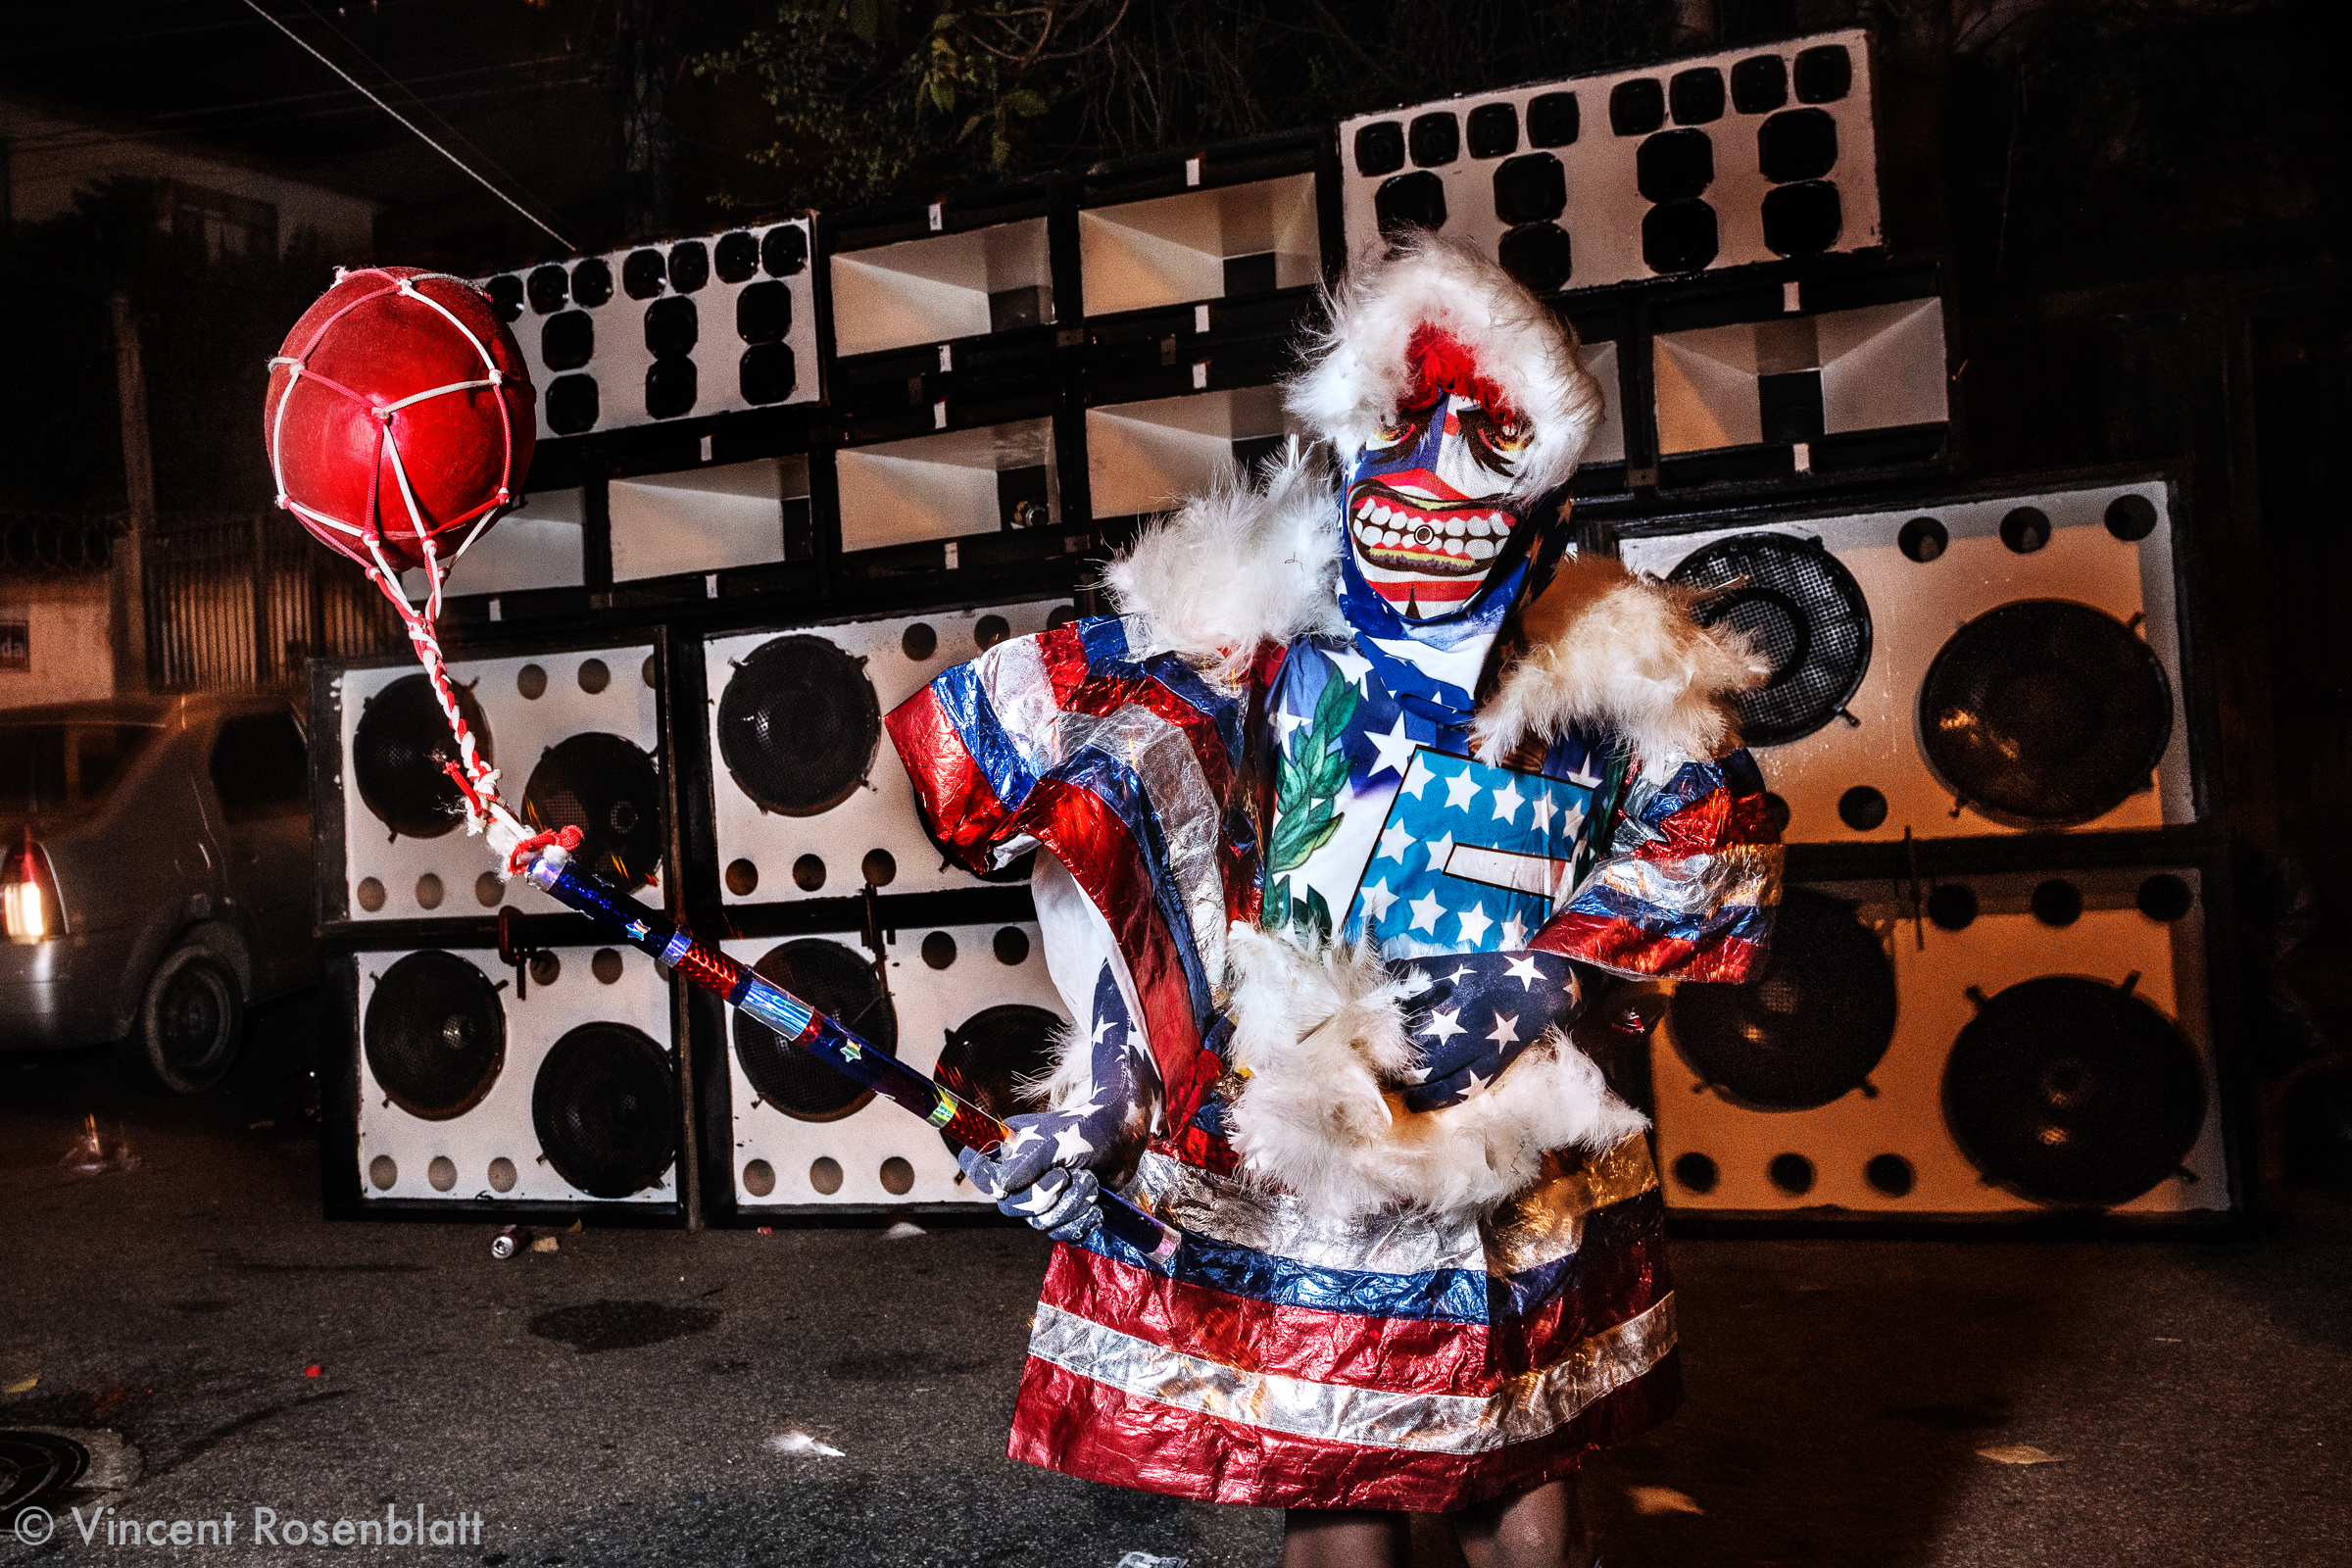  Yong Bate-Bola kid wearing an USA inspired fantasy  at the Faz Quem Quer favela, North Zone of Rio de Janeiro, Carnival 2018. Baile Funk soundsystem in the background, as Funk Carioca is the main soundtrack for the Bate-Bola. 